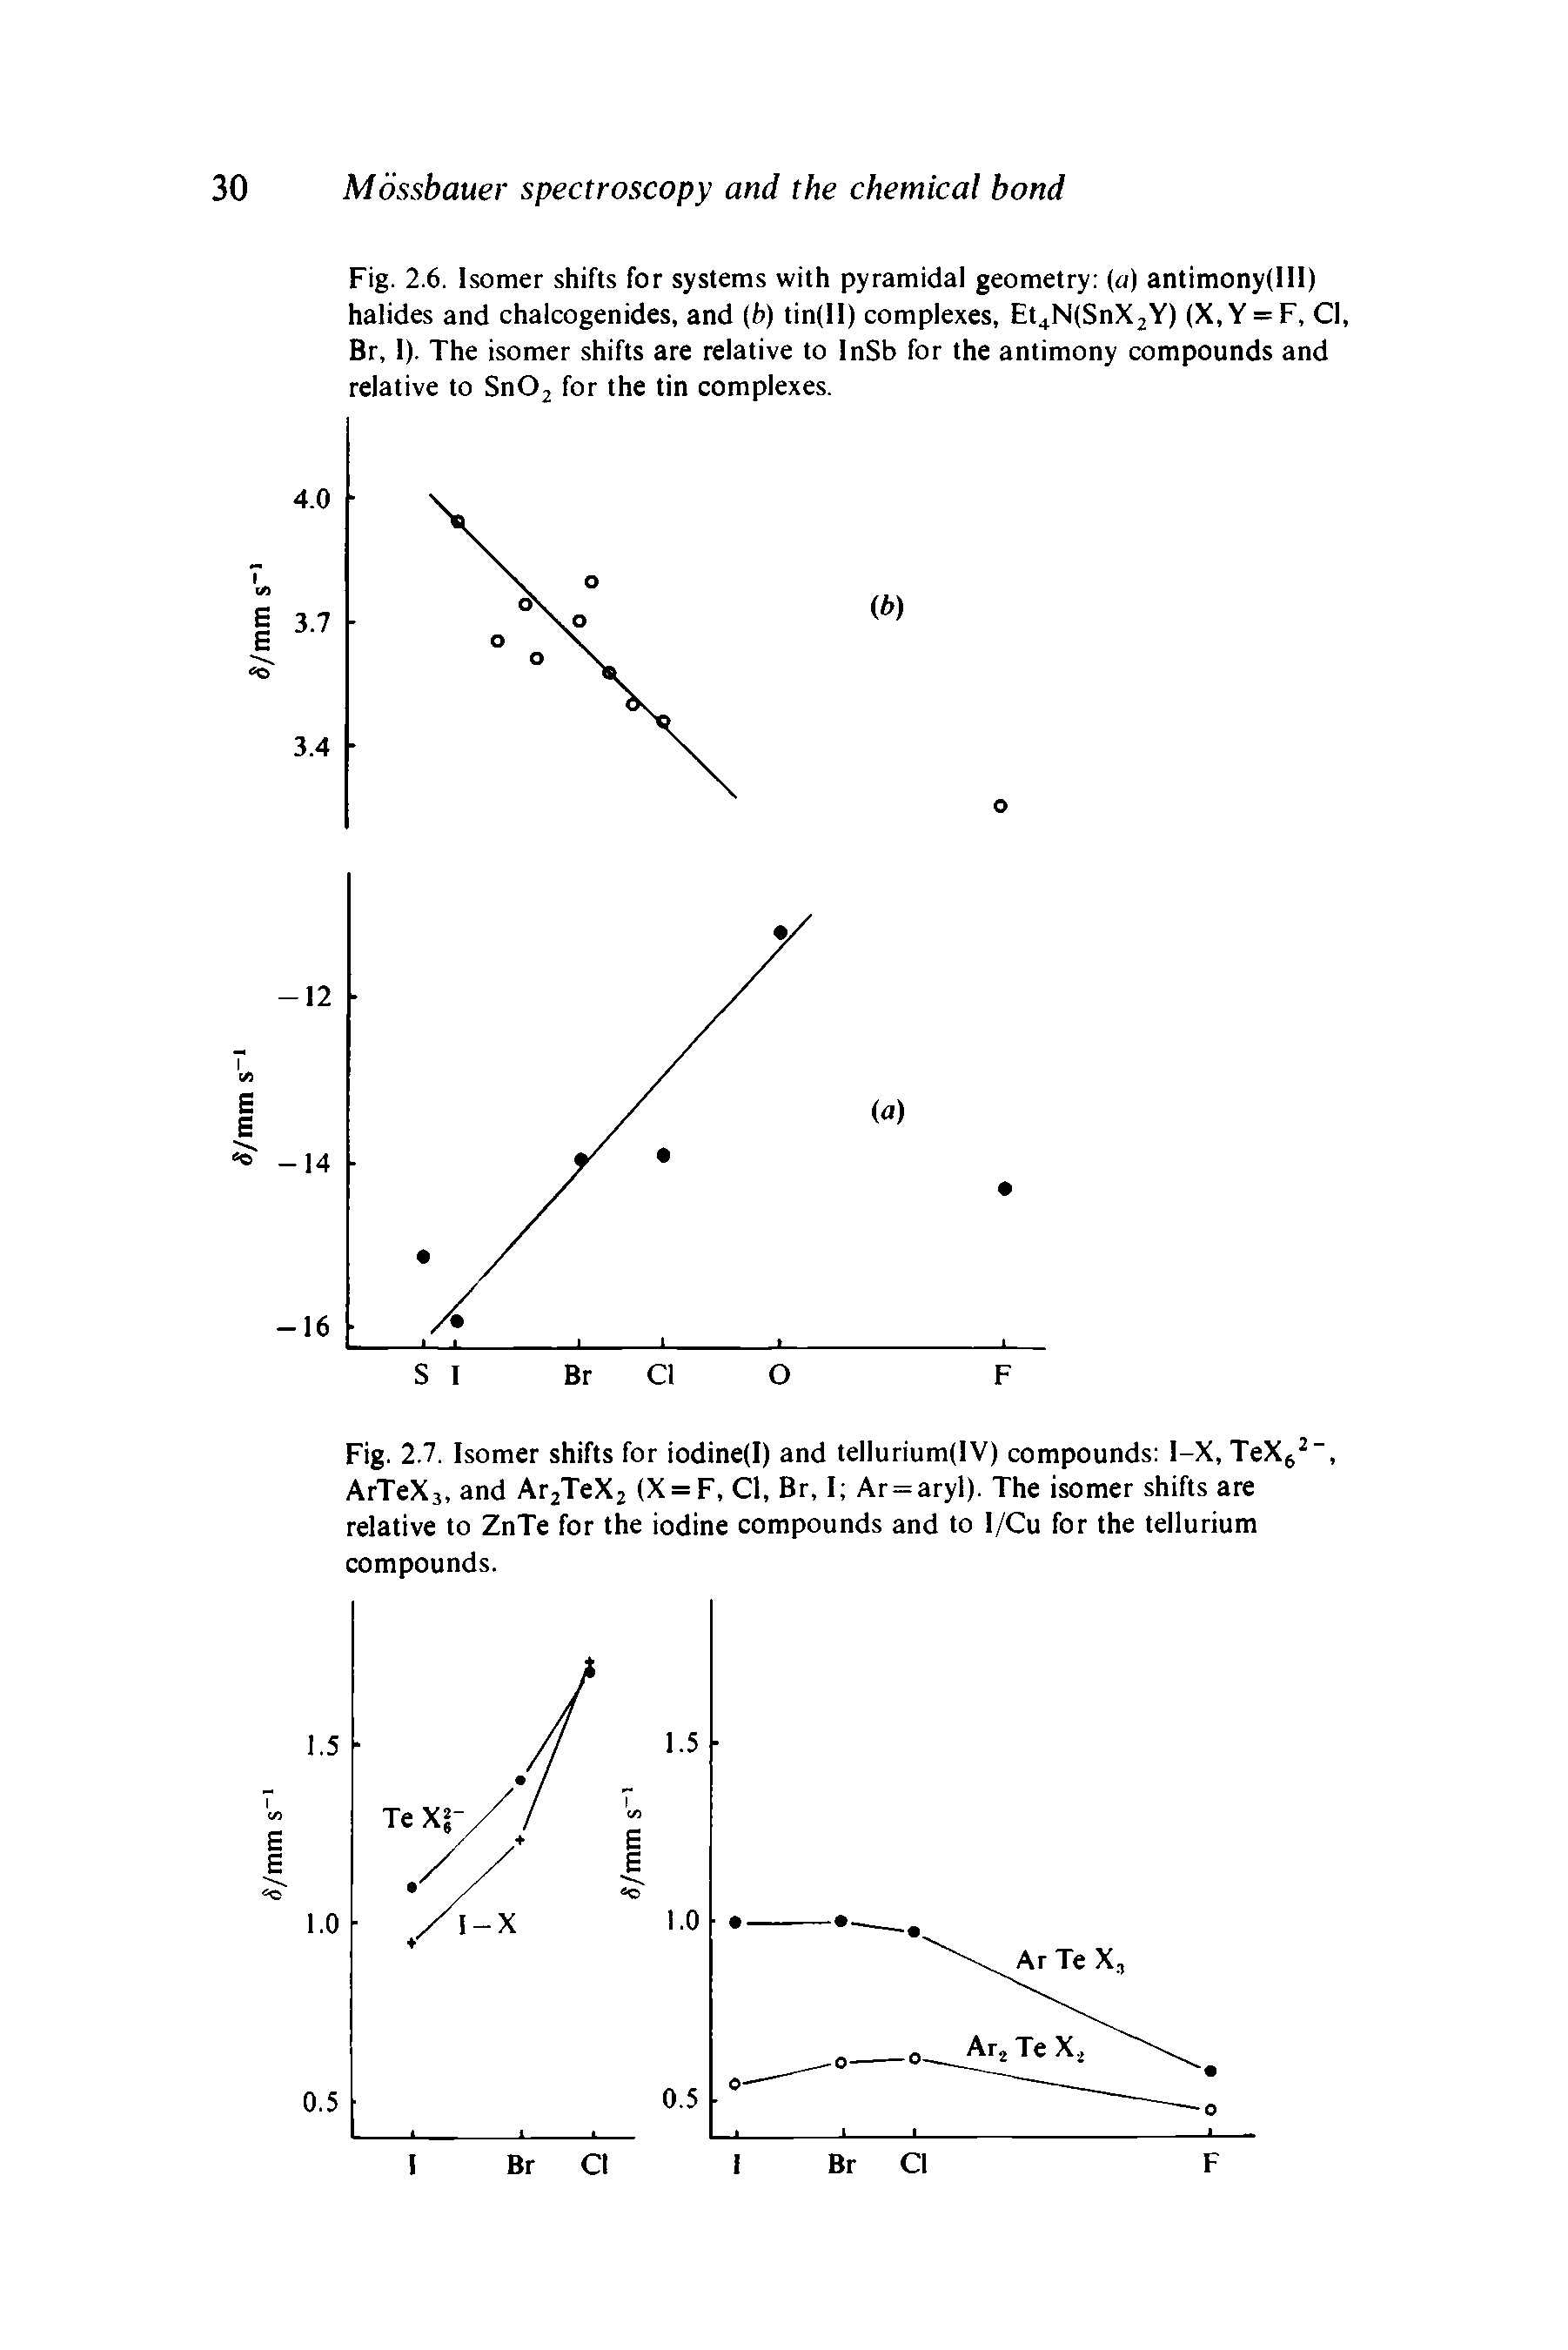 Fig. 2.7. Isomer shifts for iodine(I) and tellurium(IV) compounds I-X, TeX " ArTeXj, and ArjTeXj (X = F, Cl, Br, I Ar = aryl). The isomer shifts are relative to ZnTe for the iodine compounds and to I/Cu for the tellurium compounds.